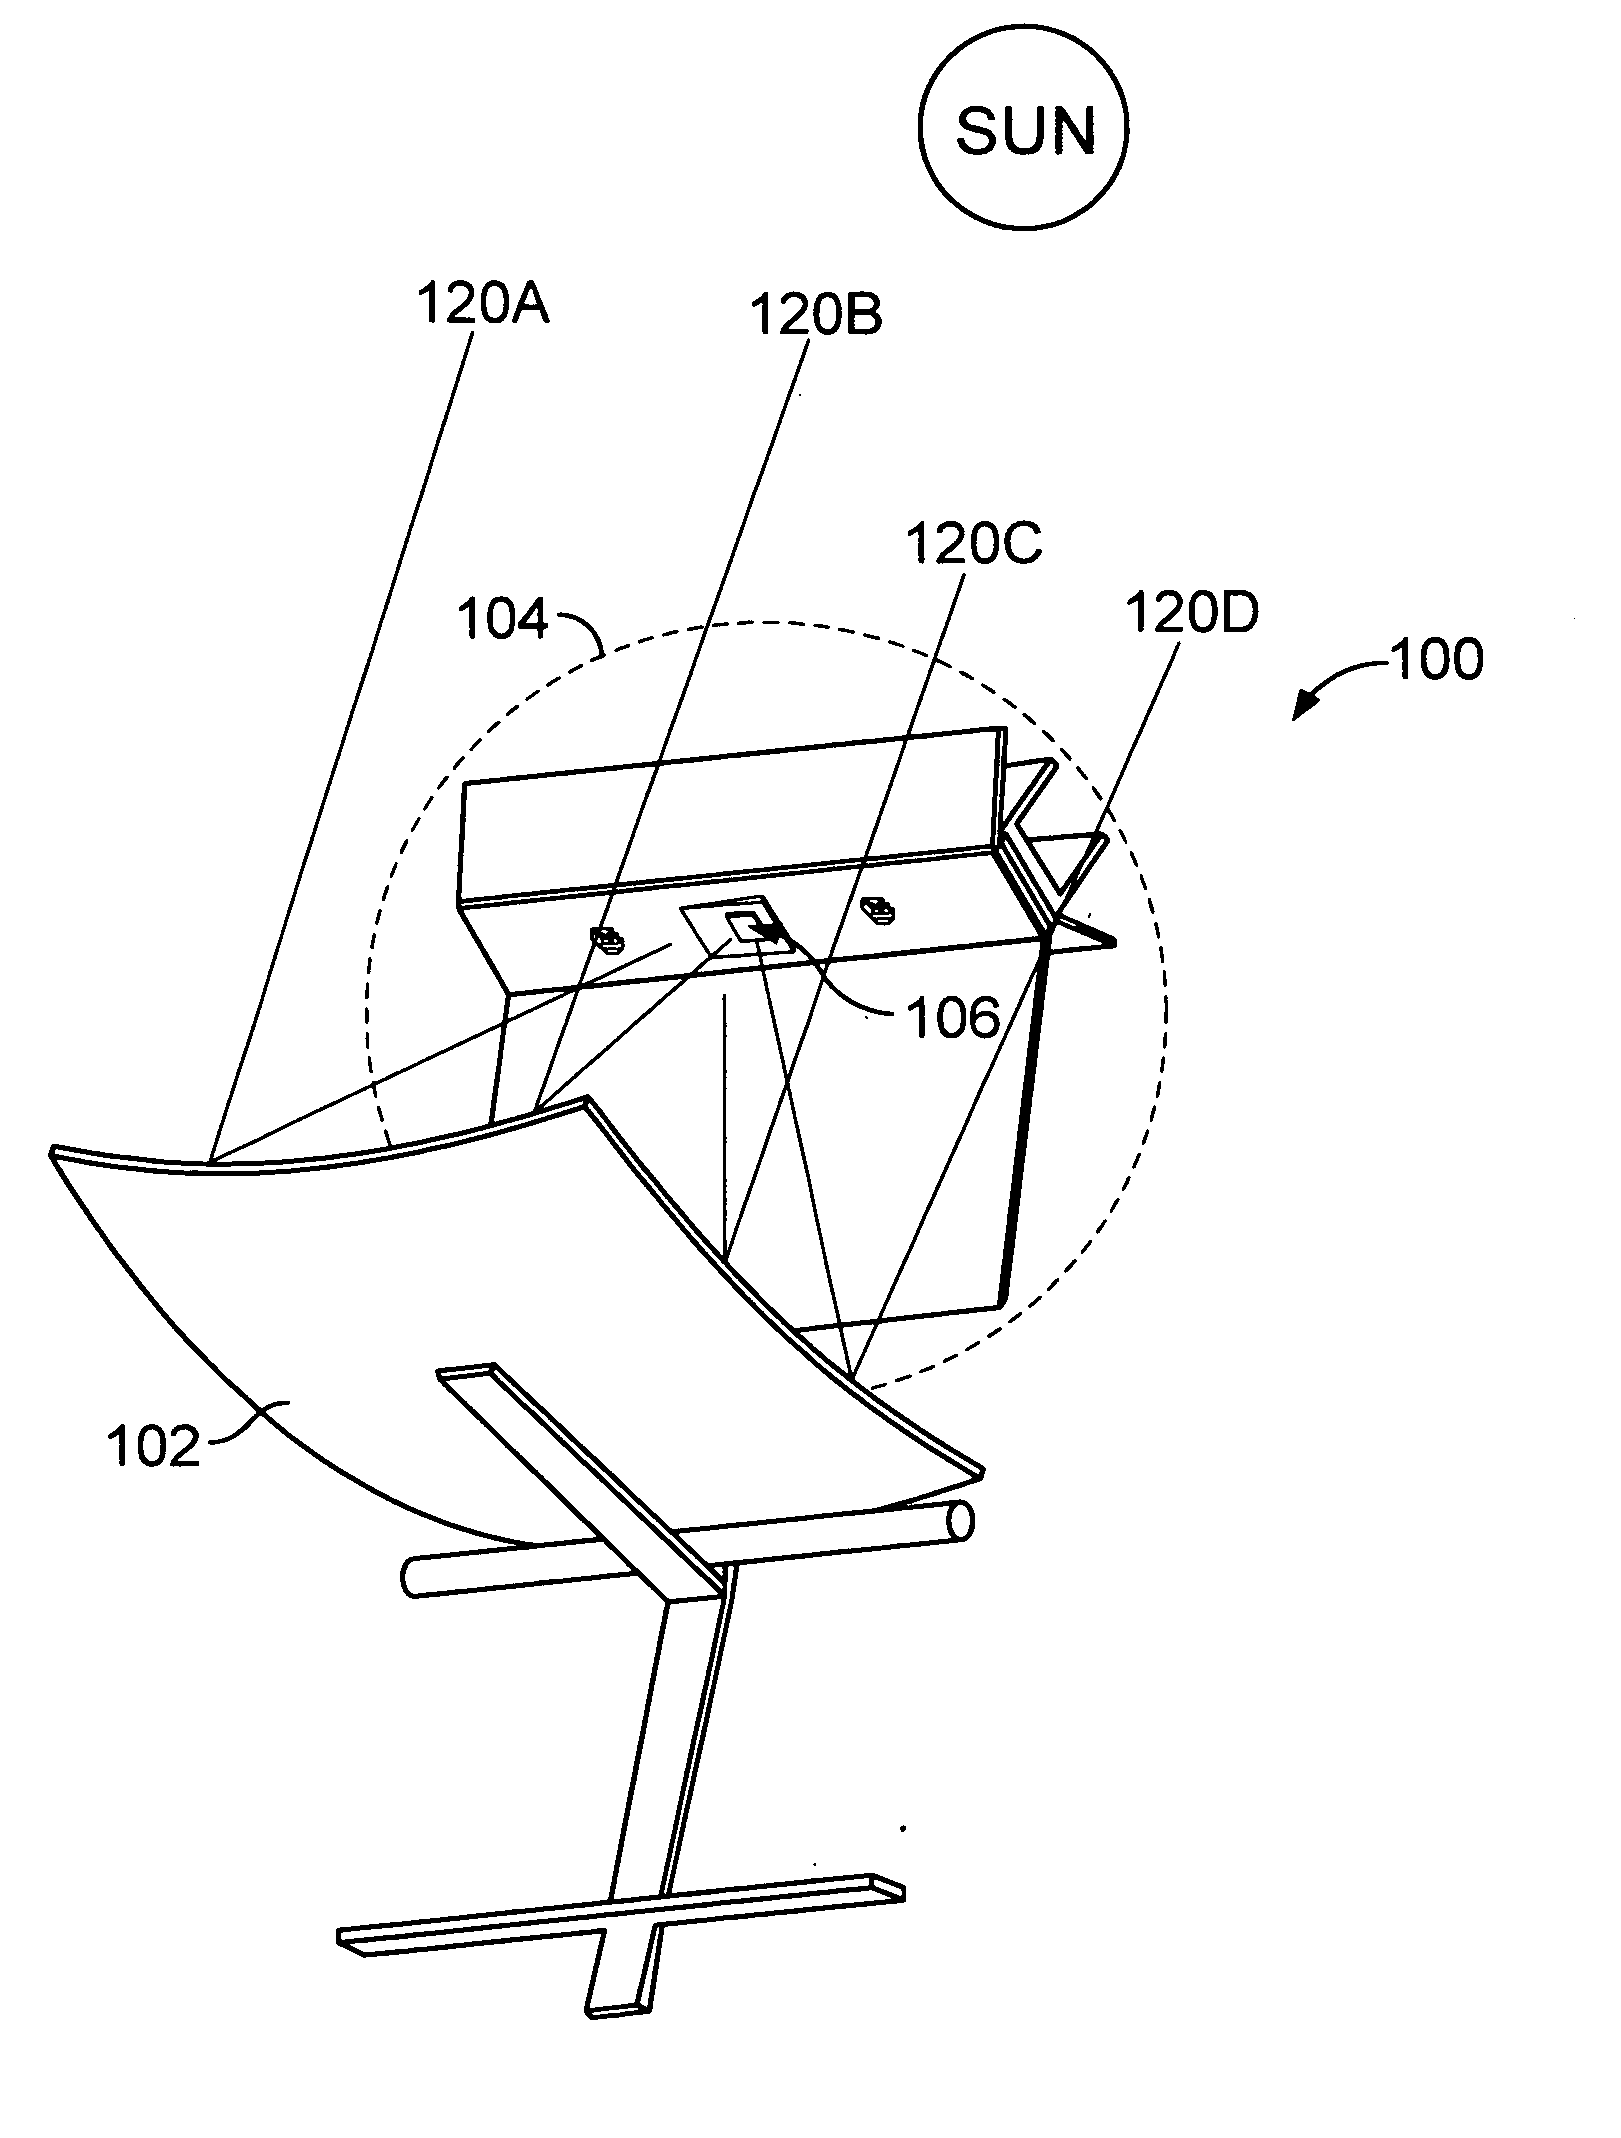 Reflective secondary optic for concentrated photovoltaic systems